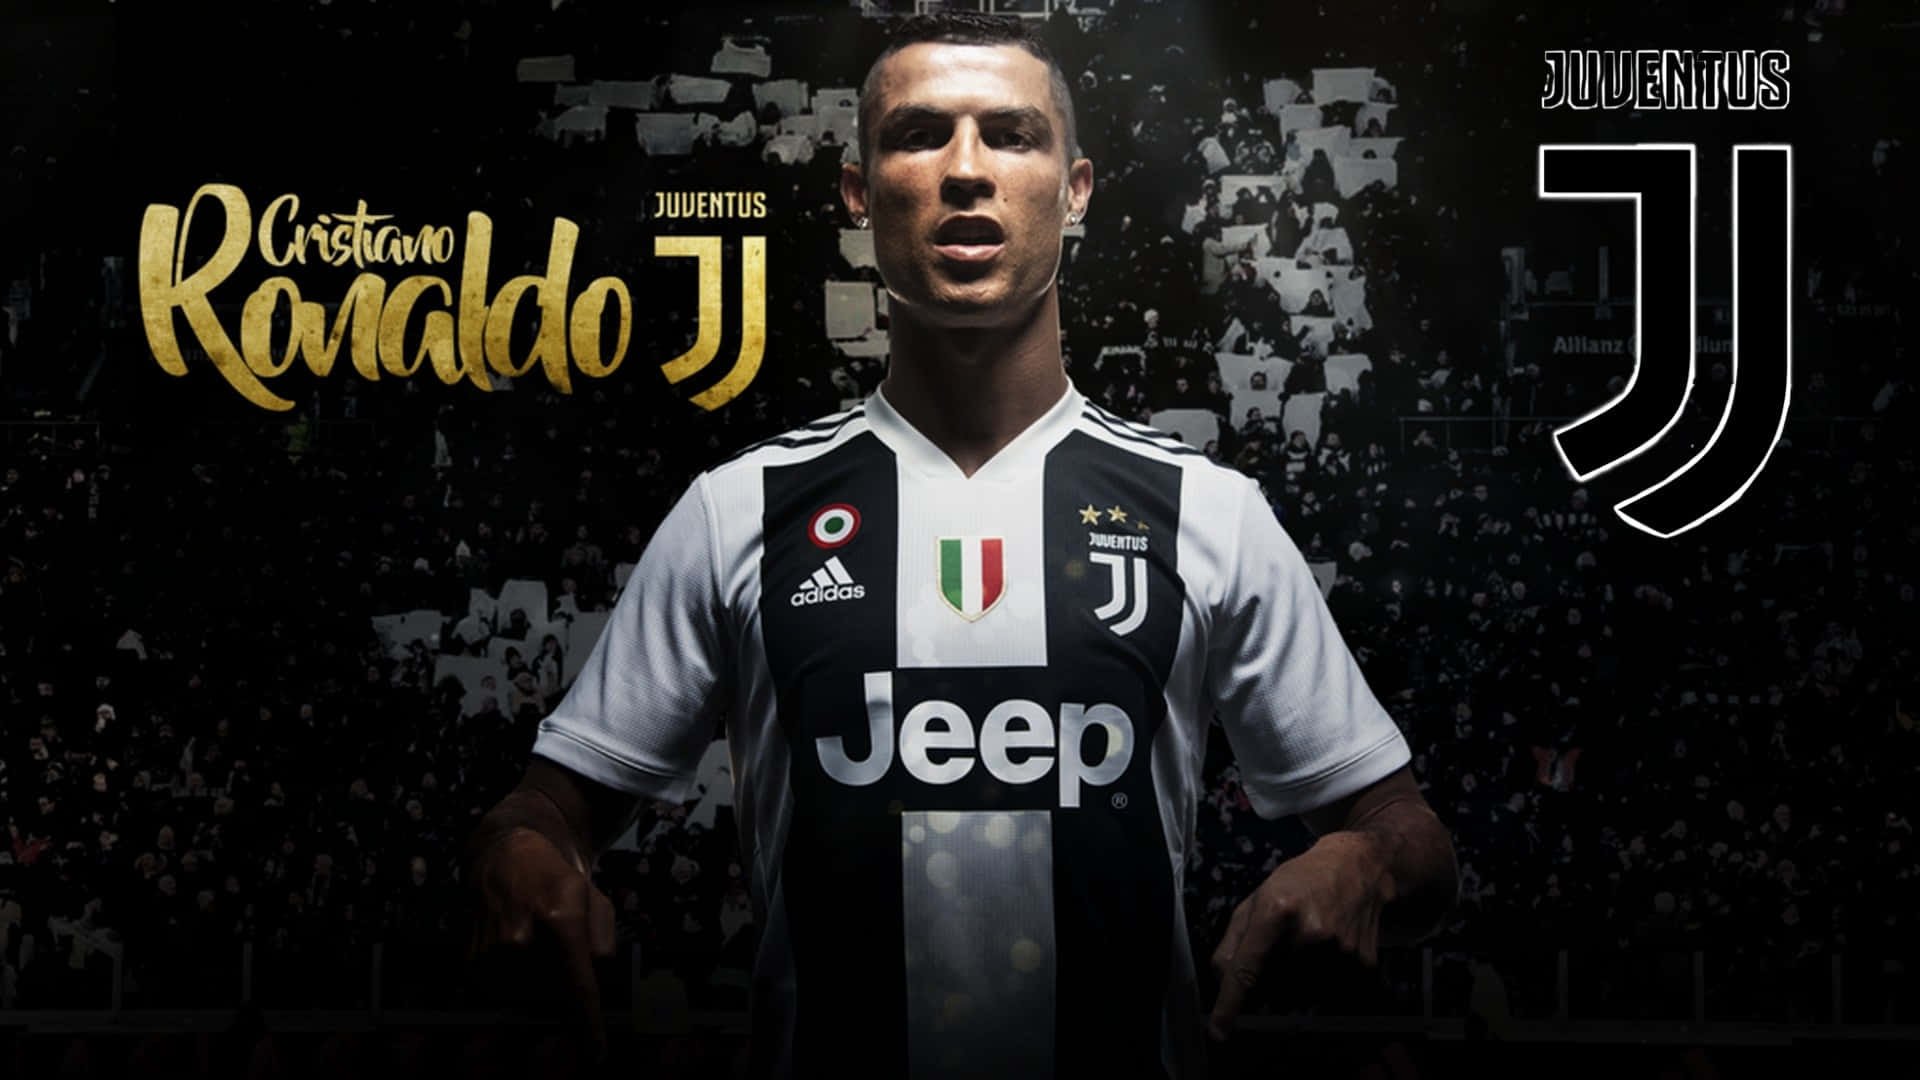 Show your support of the Champions: Juventus